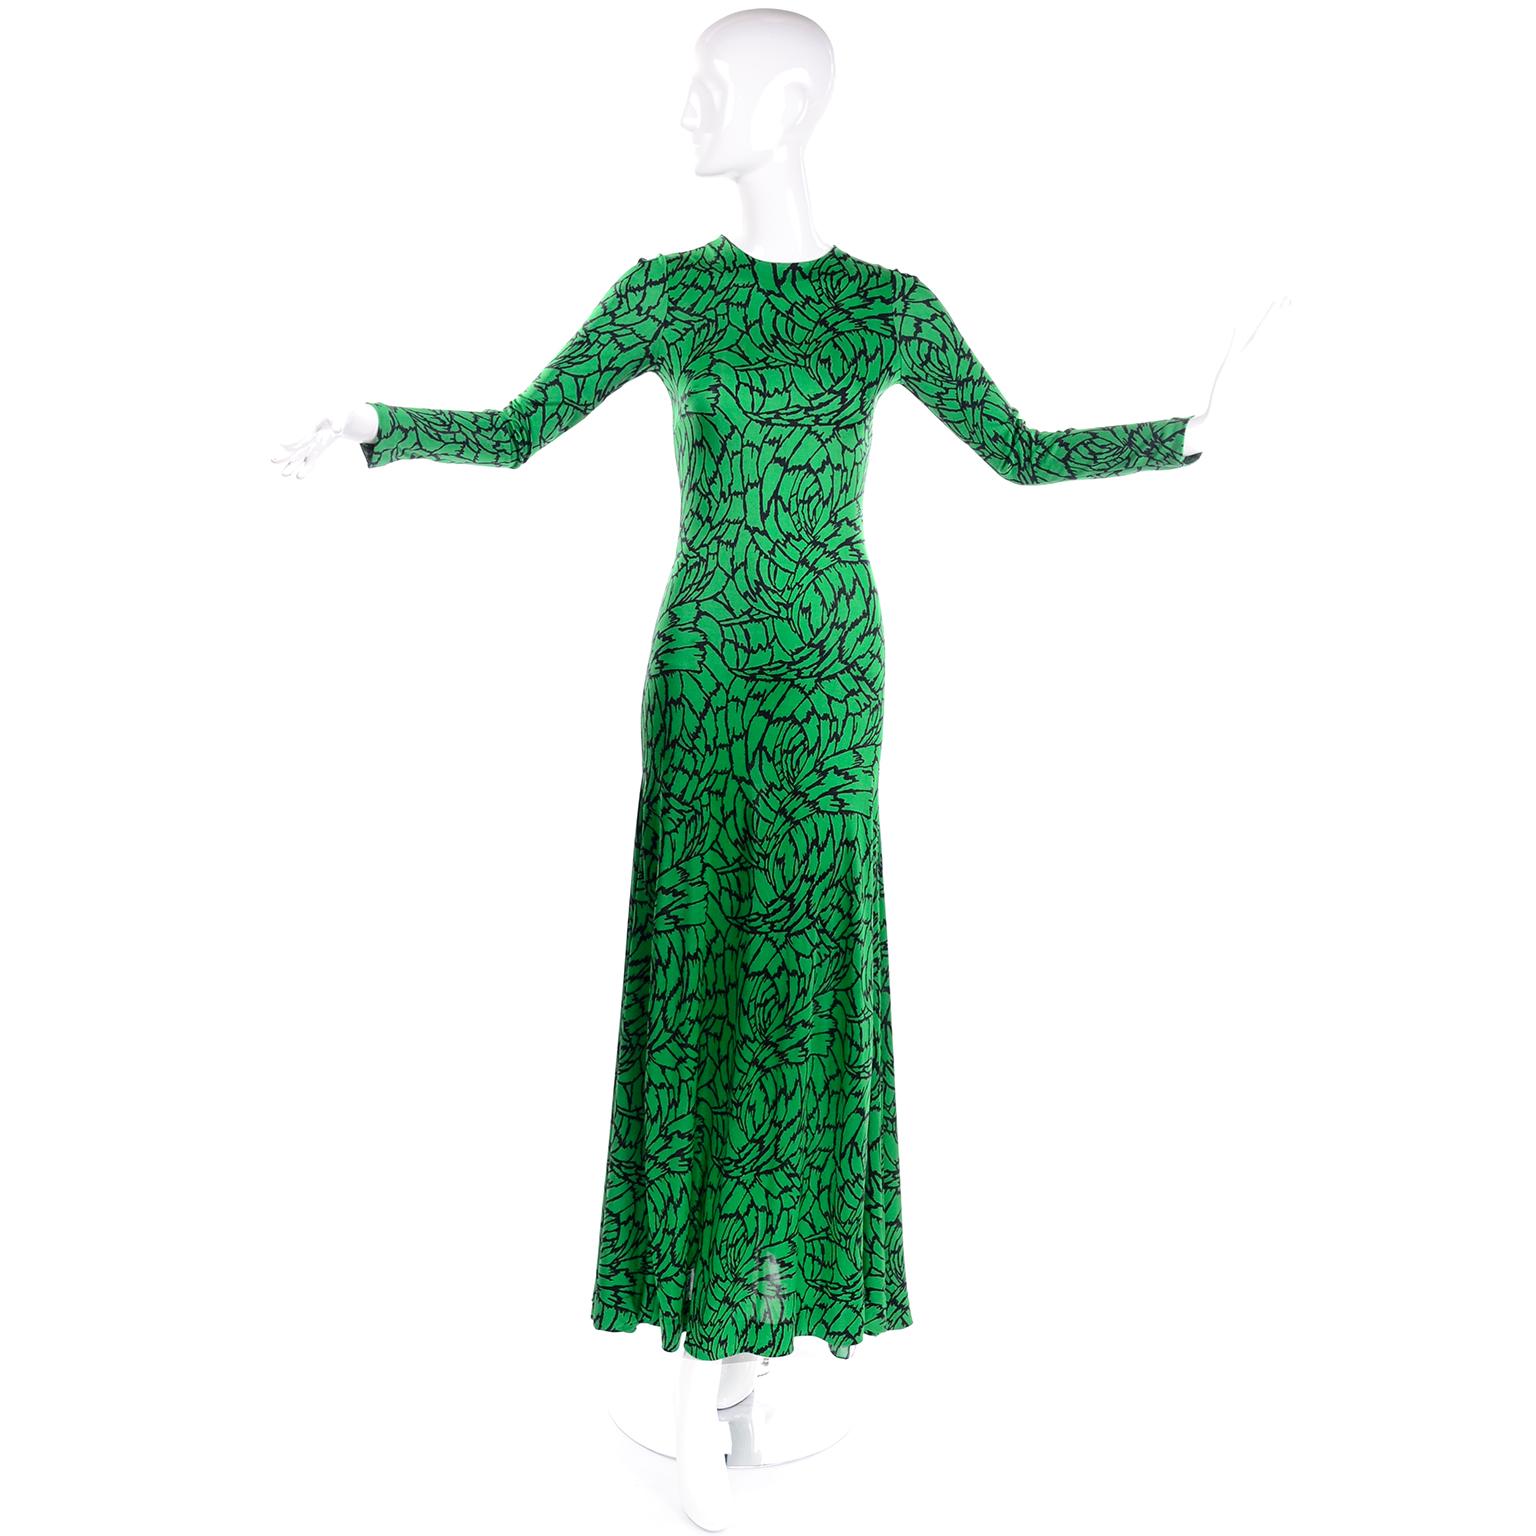 This is a lovely vintage DVF dress from the 1970's in a rich grass green and black abstract botanical print.  The dress was designed by Diane Von Furstenberg during the period that made her famous for her jersey dresses.  This one has an incredible